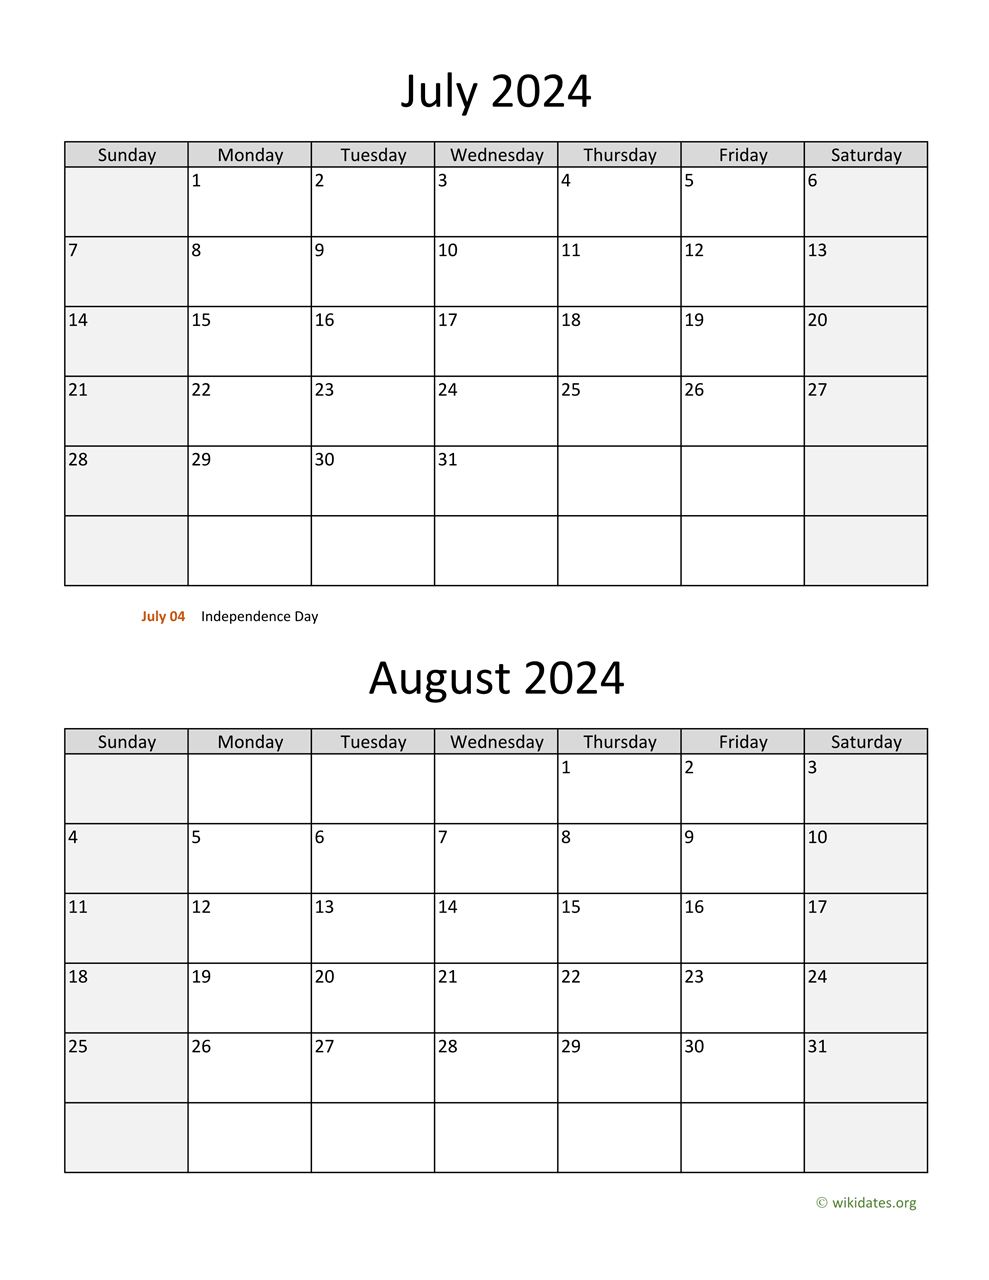 July And August 2024 Calendar | Wikidates for Printable Calendar 2024 July August